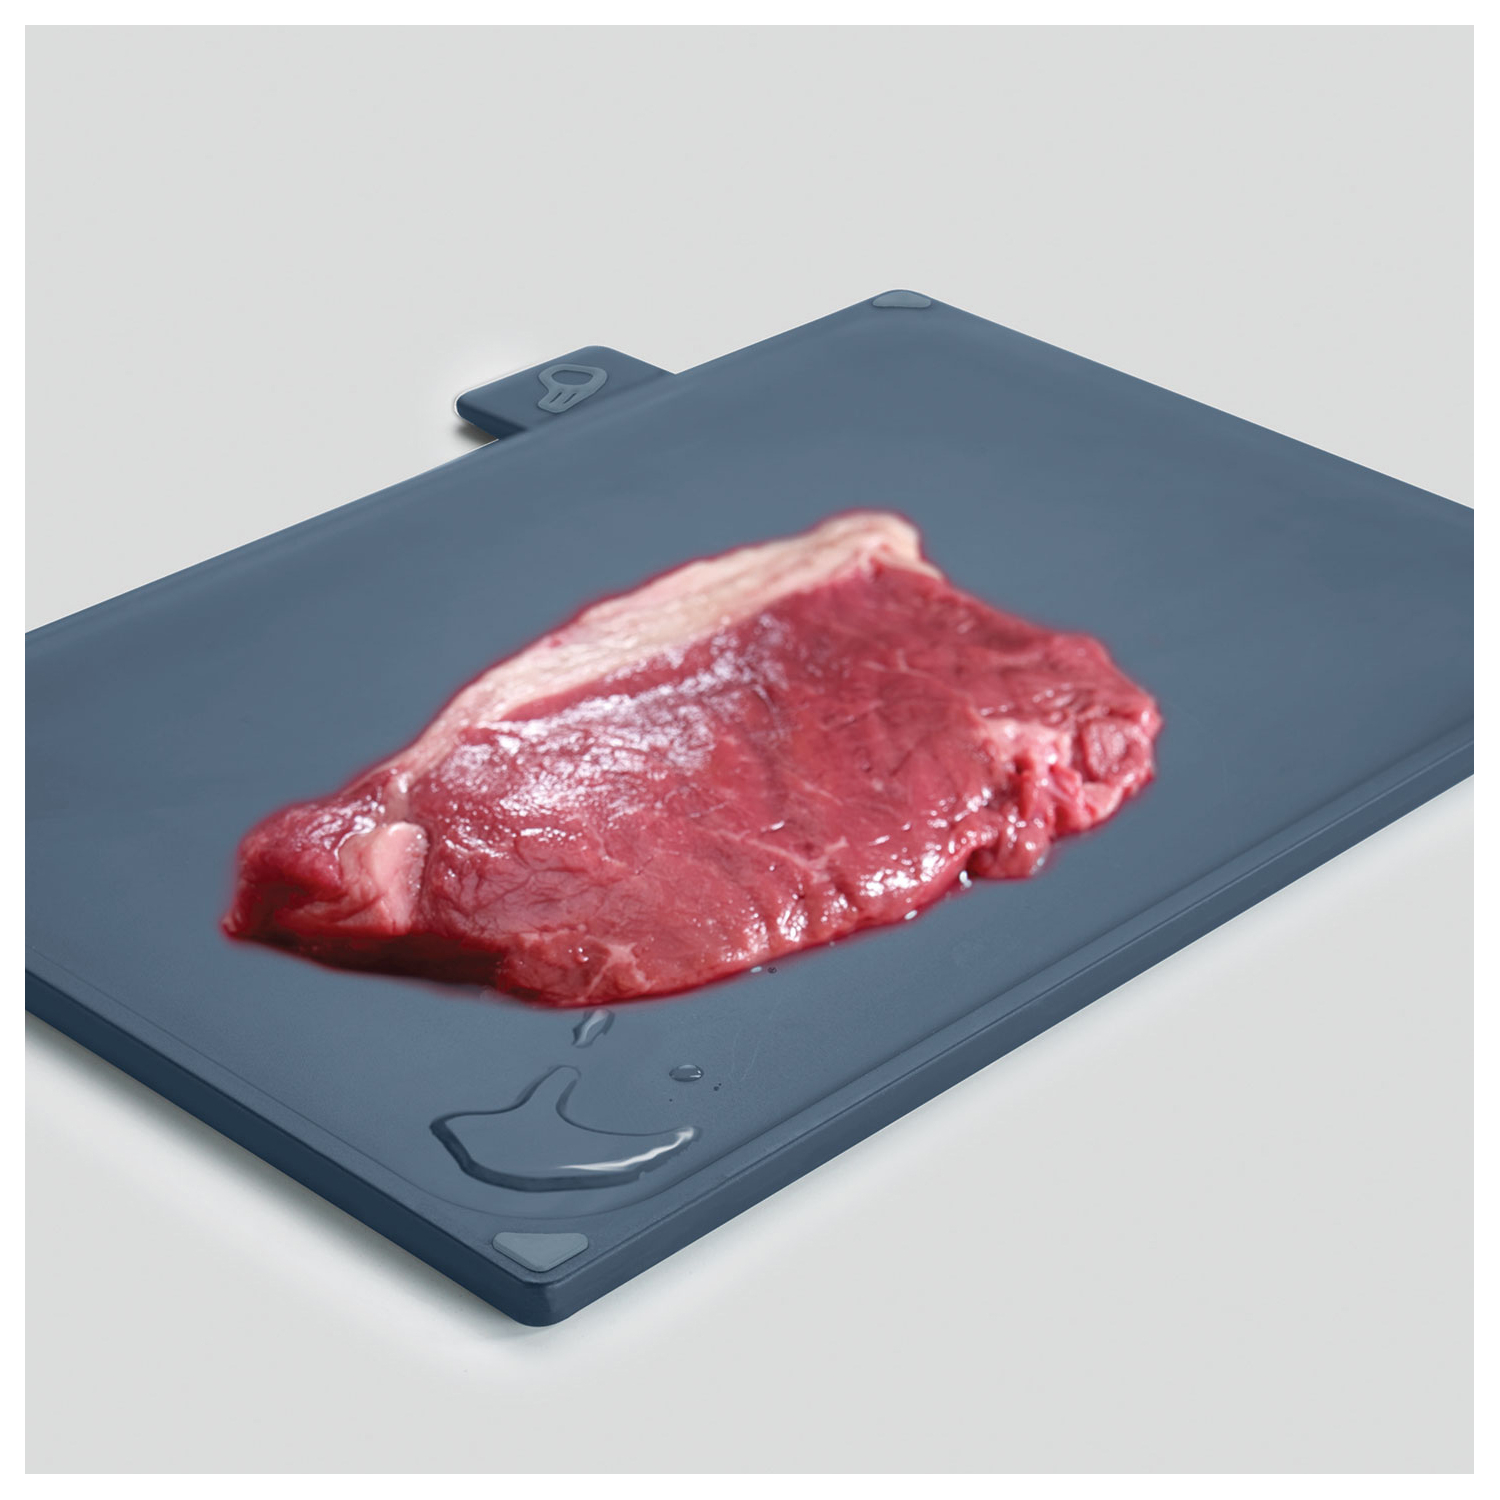 Index Large Sky Chopping Board